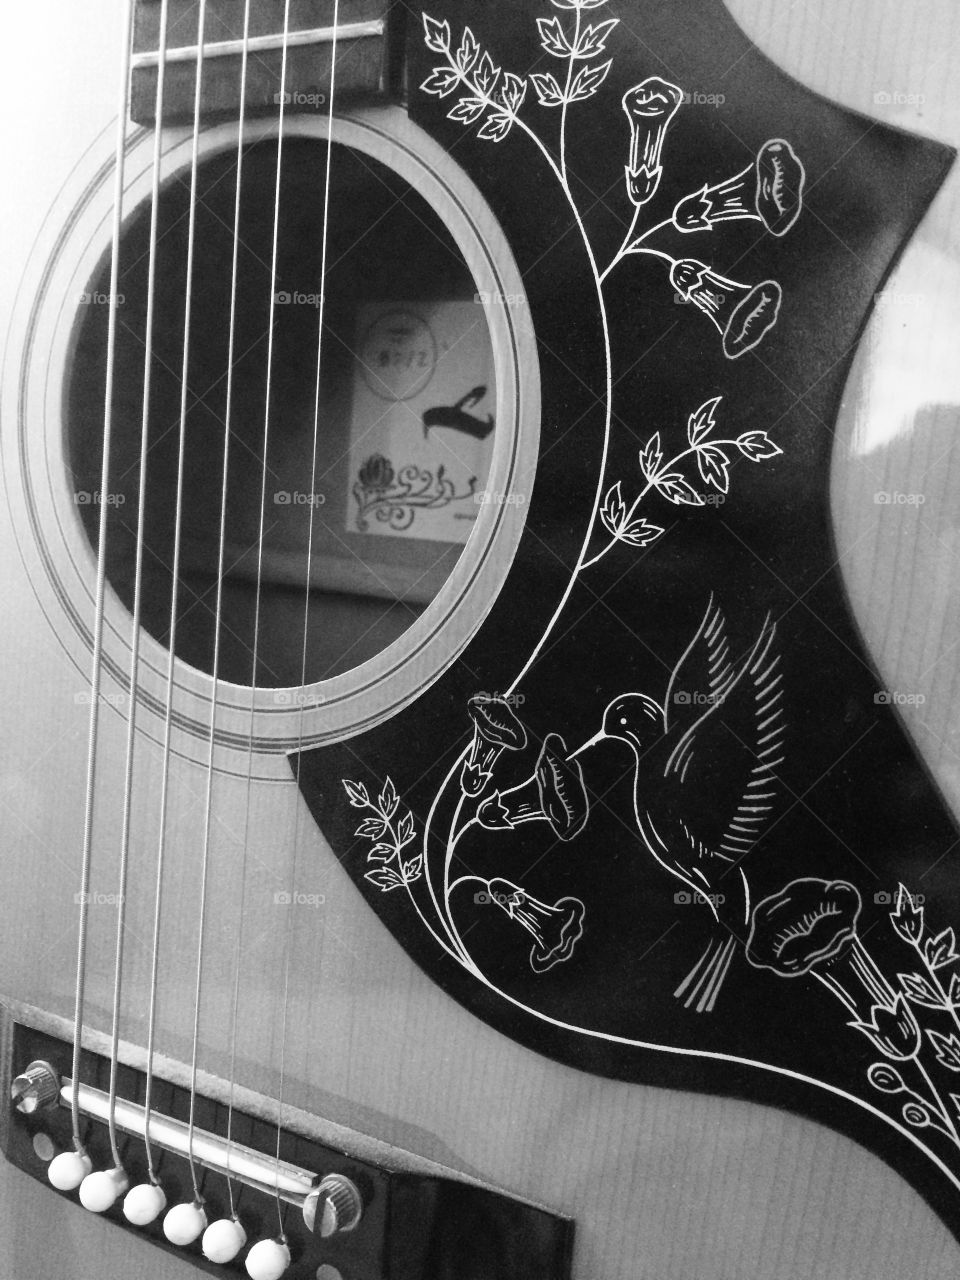 Guitar close up in black and white 